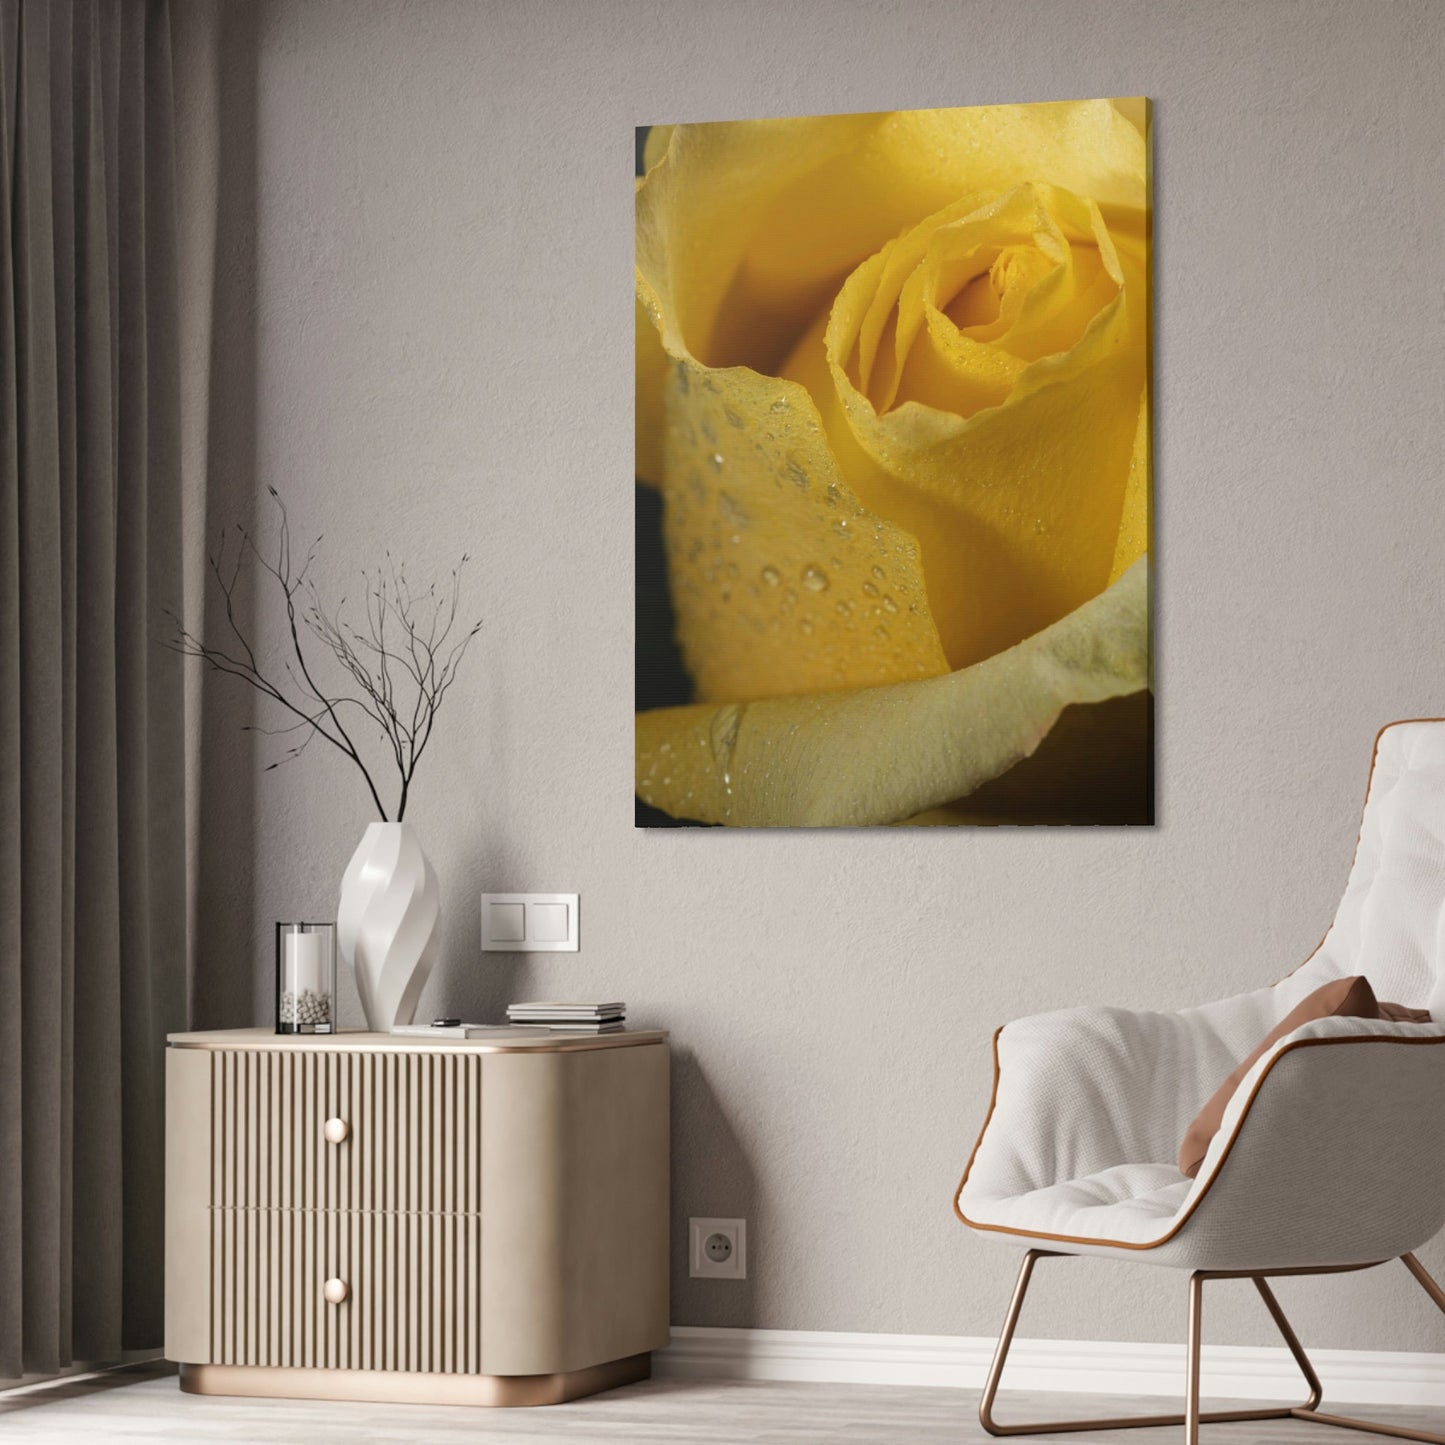 Rose Radiance: A Vibrant and Lively Painting on Canvas